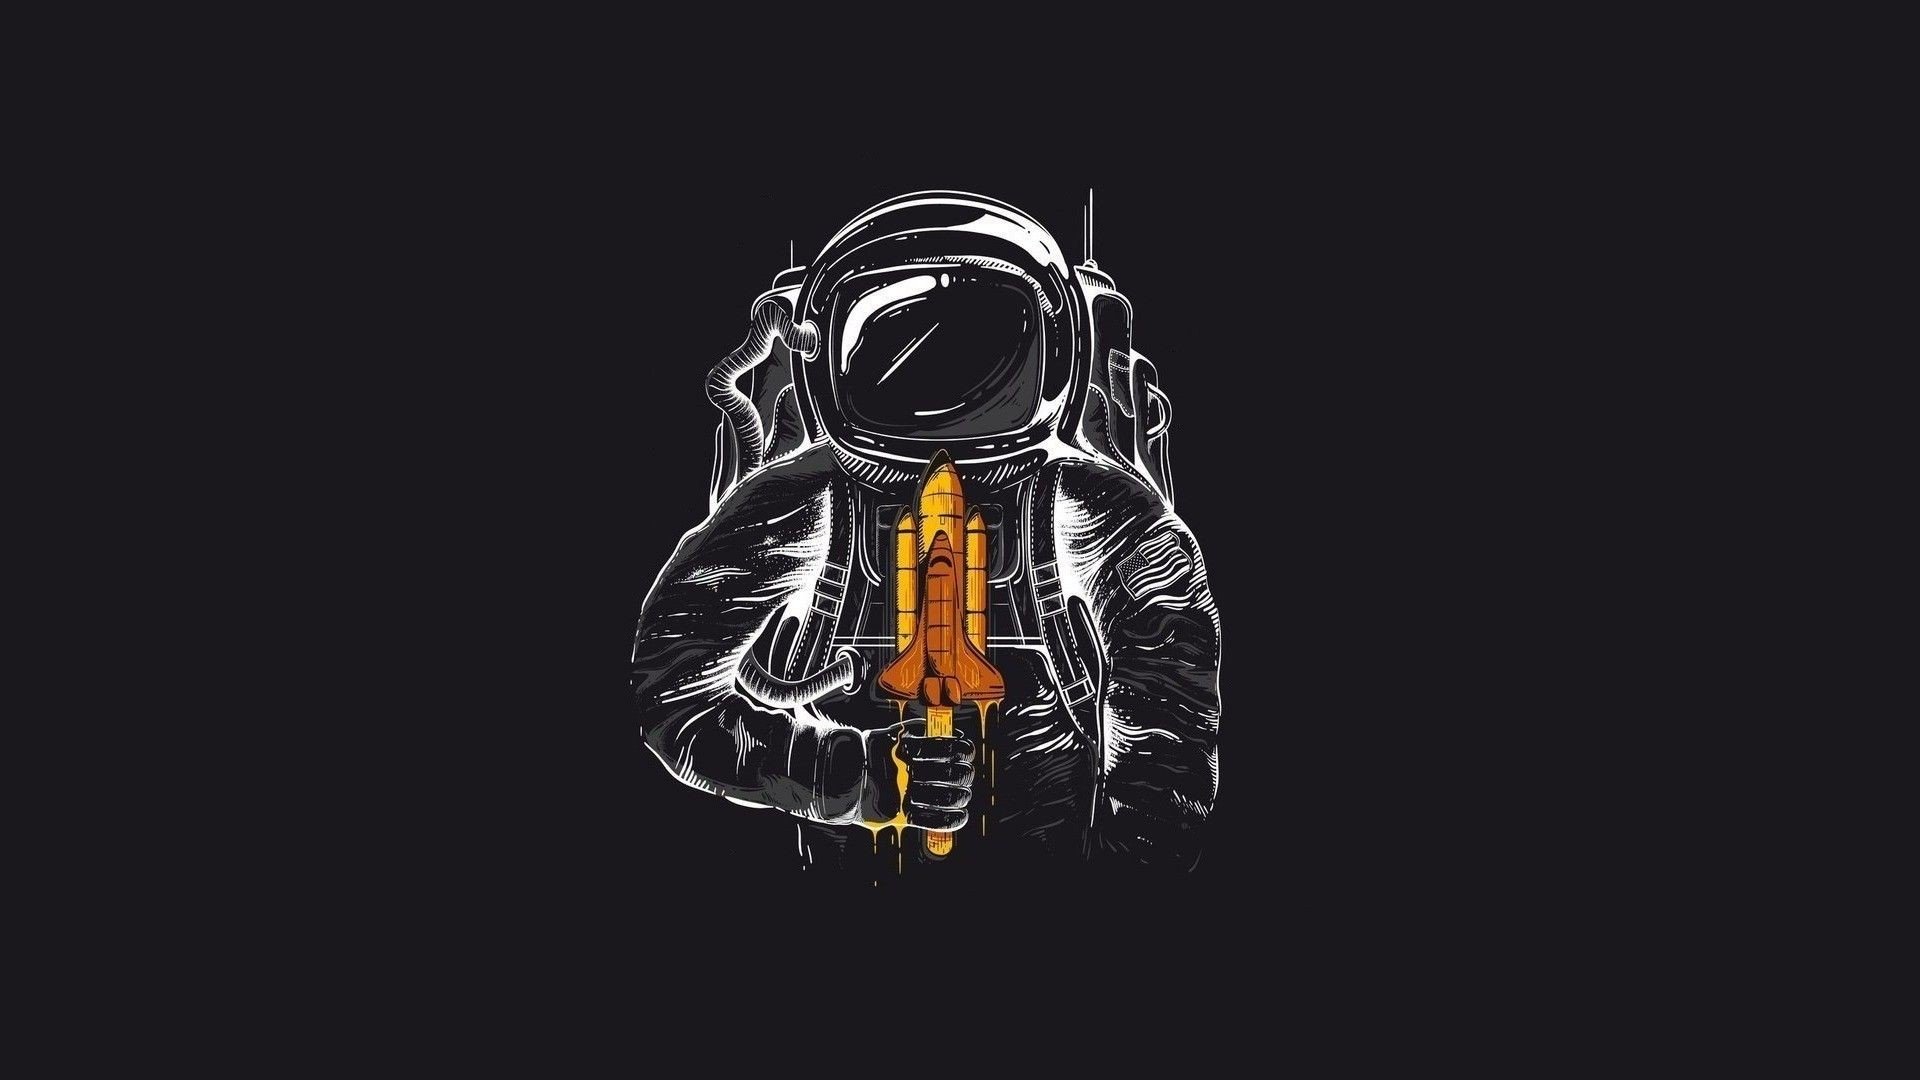 astronaut, Humor, Space shuttle, Minimalism, Black background, Selective coloring Wallpaper